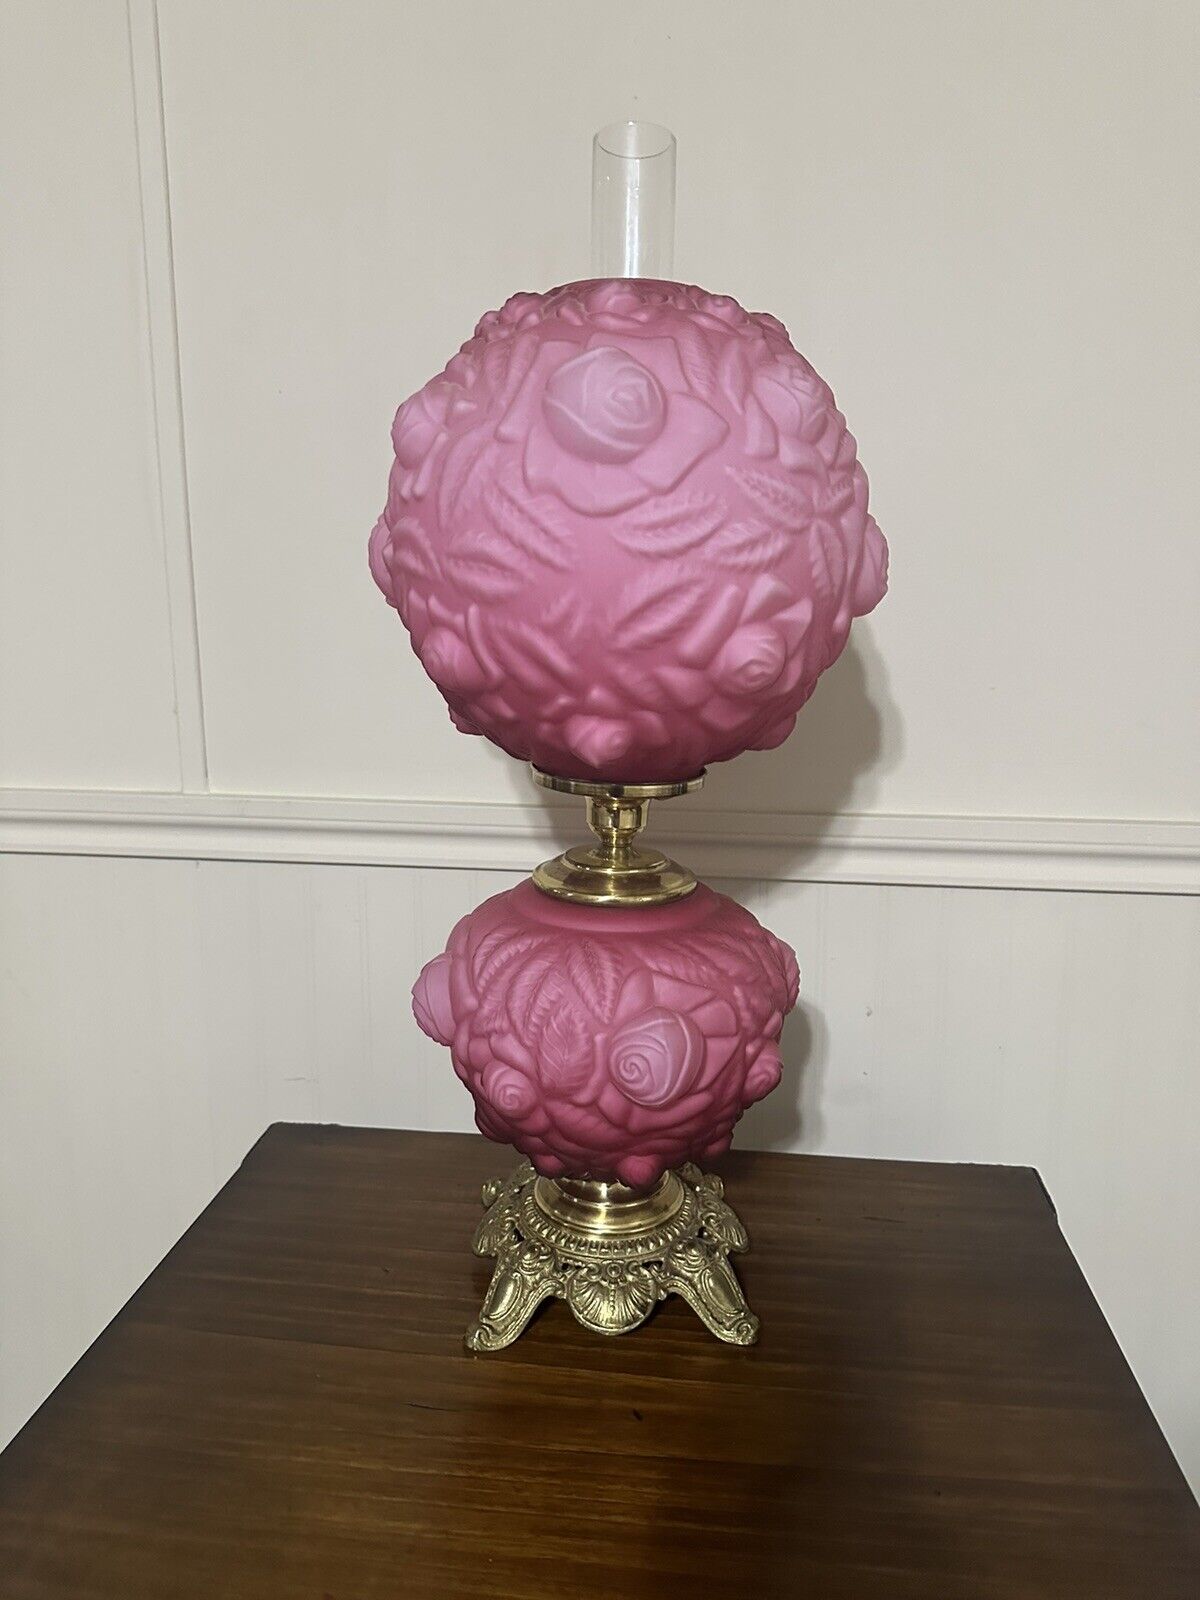 Vintage Fenton Pink Satin Puffy Rose Gone With The Wind Lamp 1950’s Era